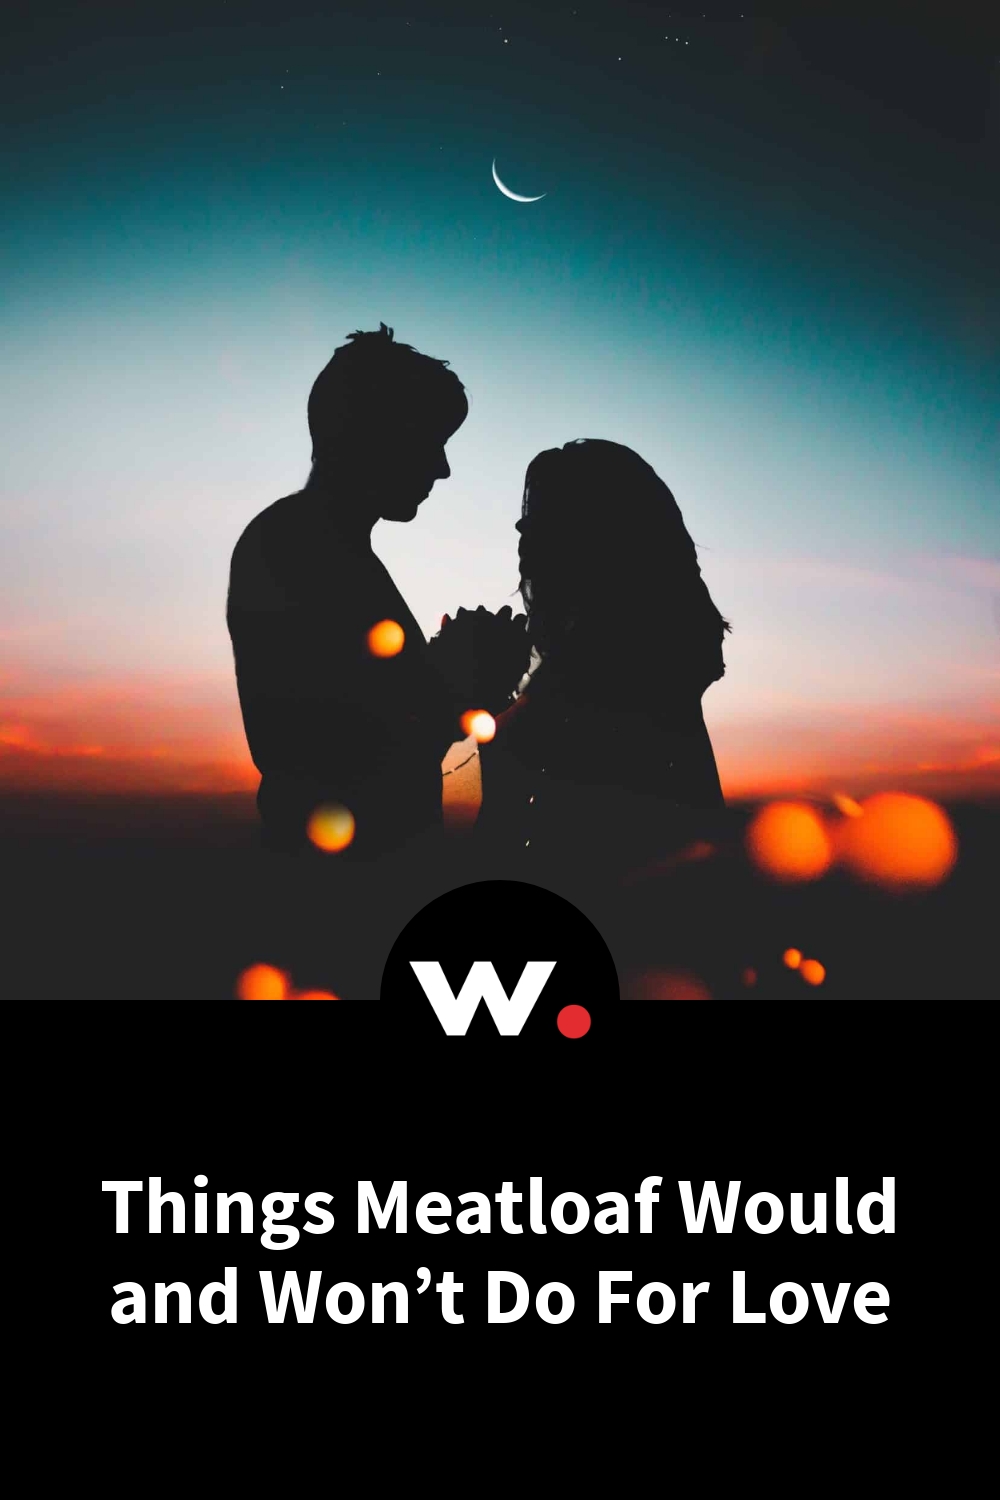 Things Meatloaf Would and Won’t Do For Love